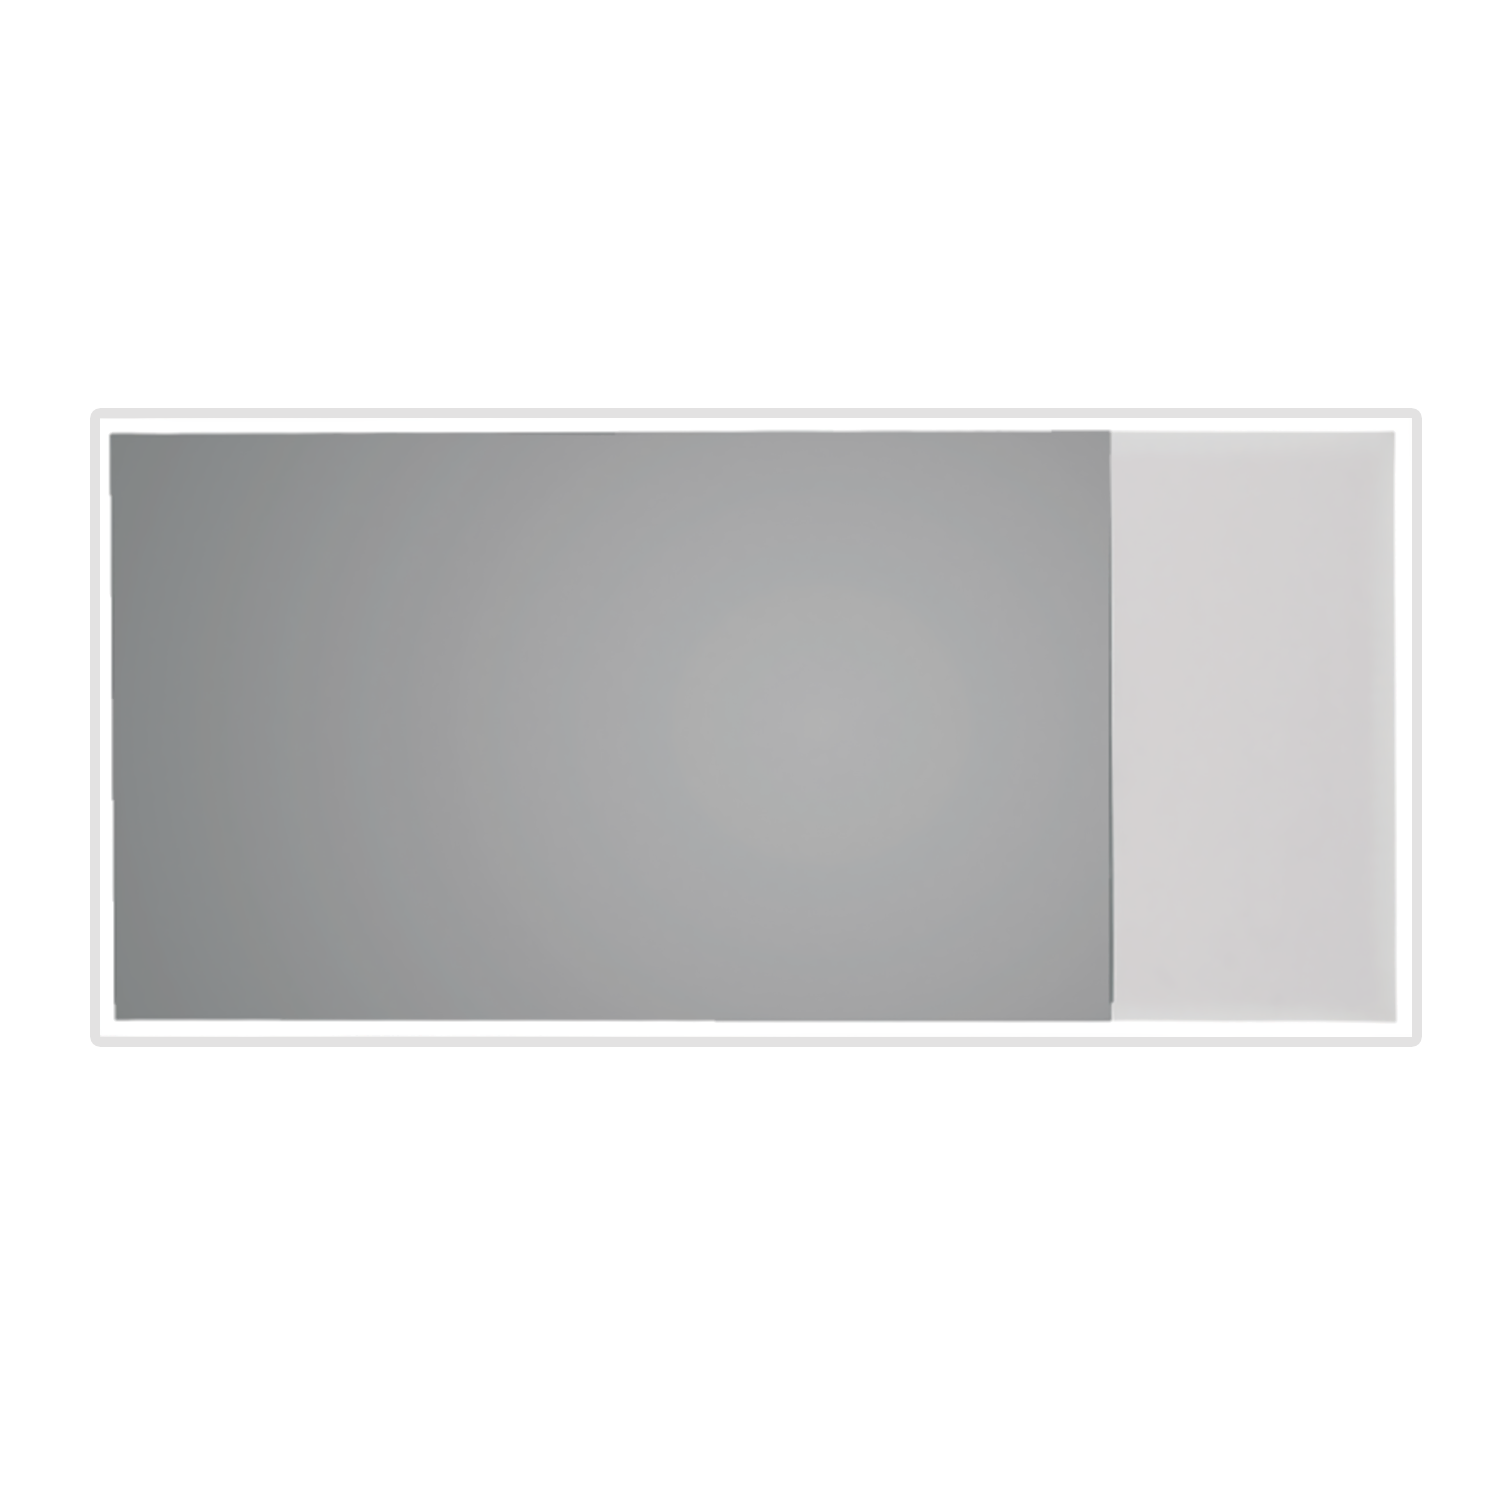 DAX Solid Surface Rectangle LED Backlit Bathroom Vanity Mirror, Wall Mount, 46-7/16 x 23-2/3 x 1-3/8 Inches (DAX-AB-1570)